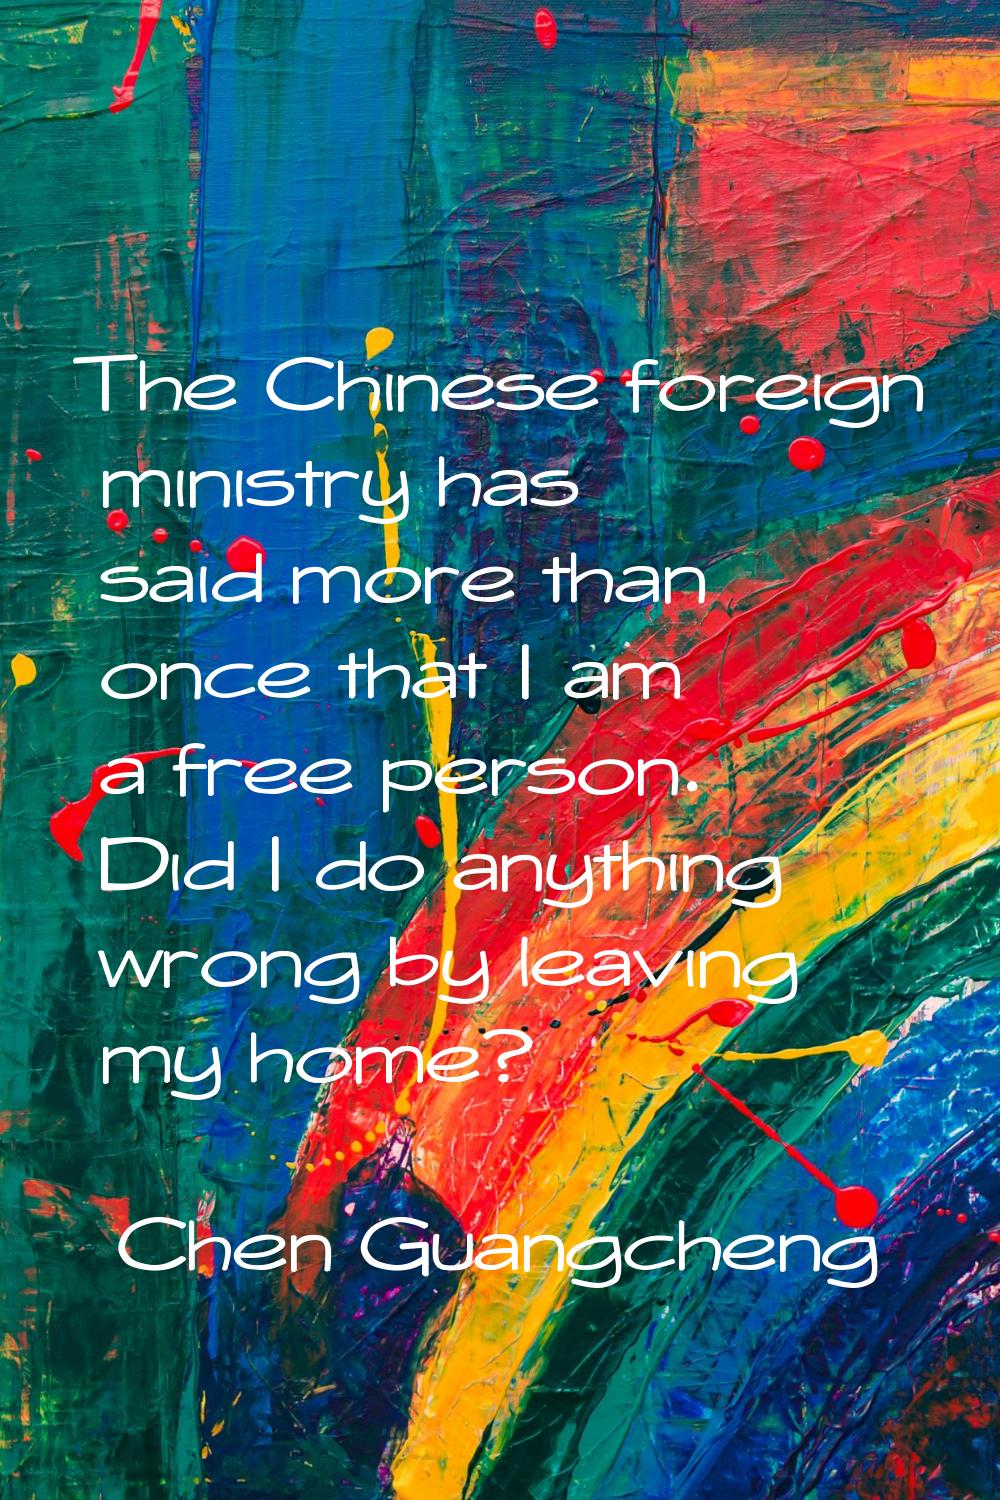 The Chinese foreign ministry has said more than once that I am a free person. Did I do anything wro